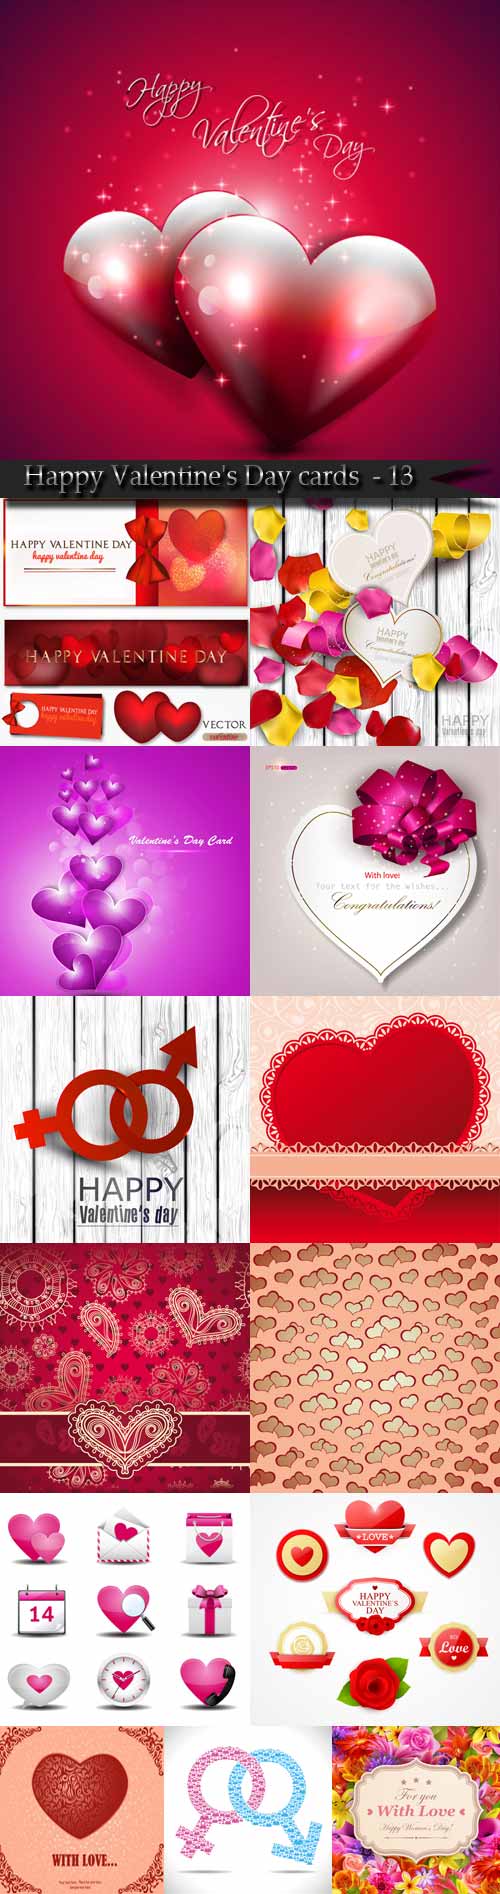 Happy Valentine's Day cards and backgrounds - 13